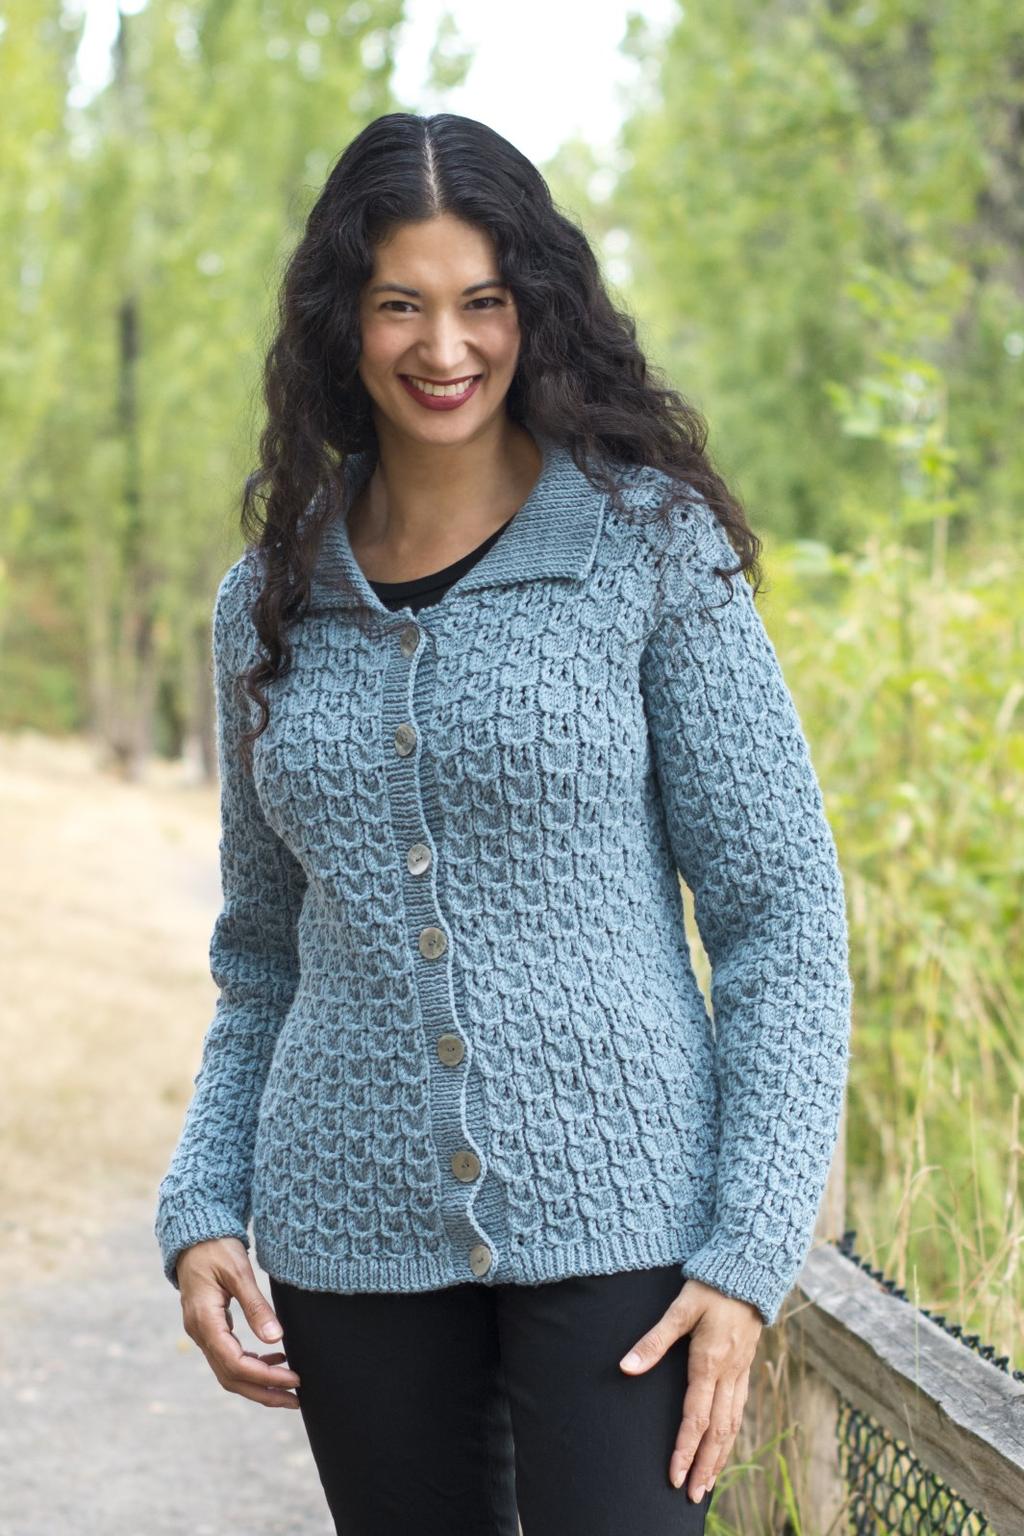 220 Superwash Cables and Lace Cardigan Designed by Melissa Leapman Skill Level: Intermediate Sizes: Small (Medium, Large, 1X) Instructions are for smallest size, with changes for other sizes noted in